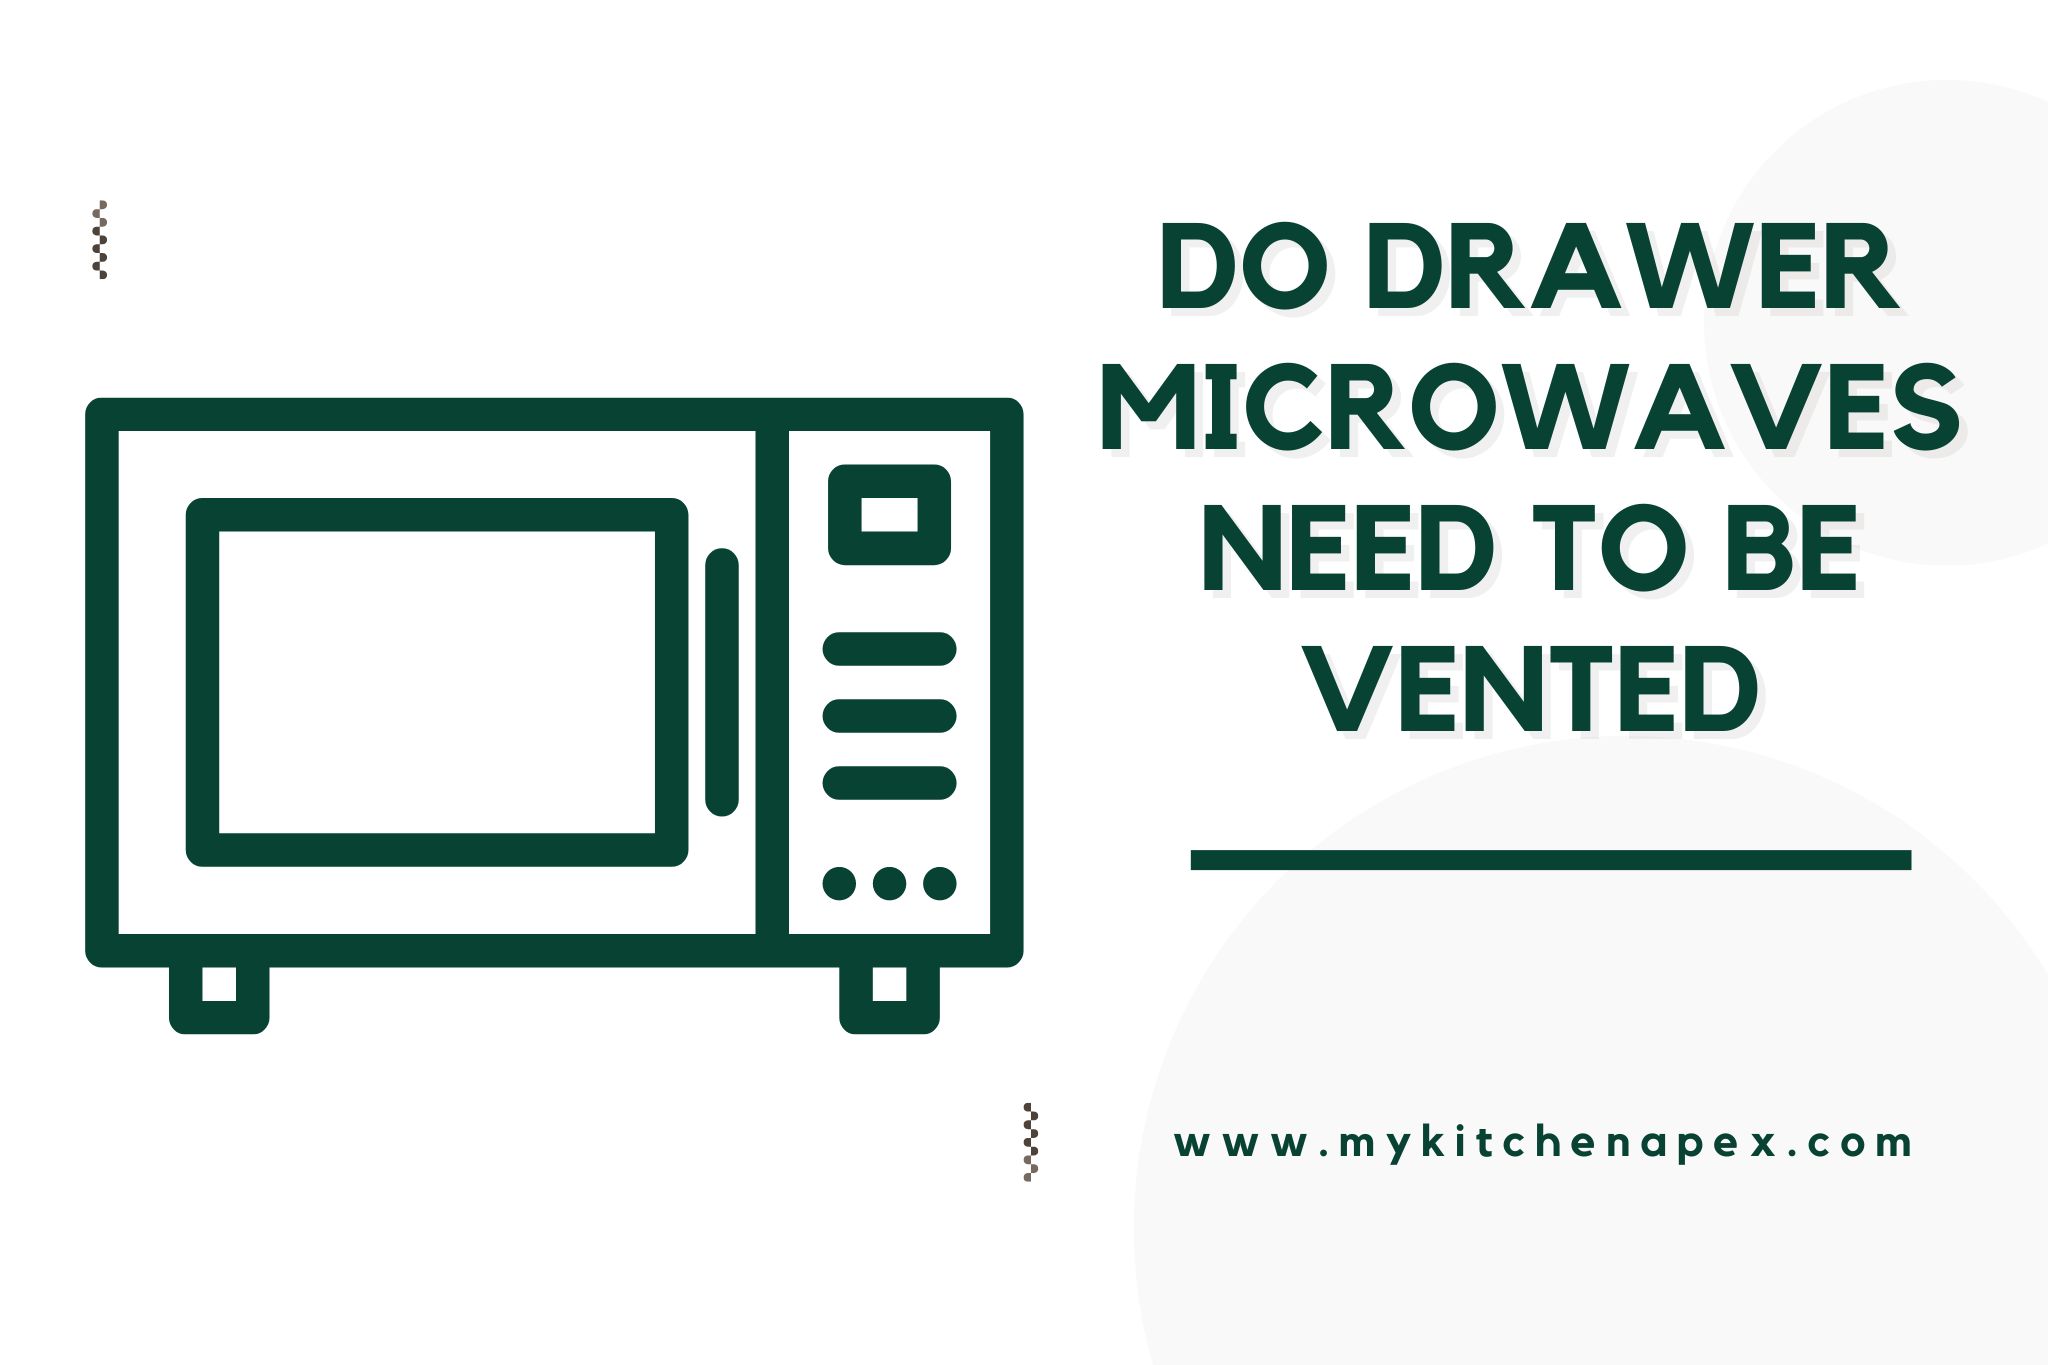 do drawer microwaves need to be vented